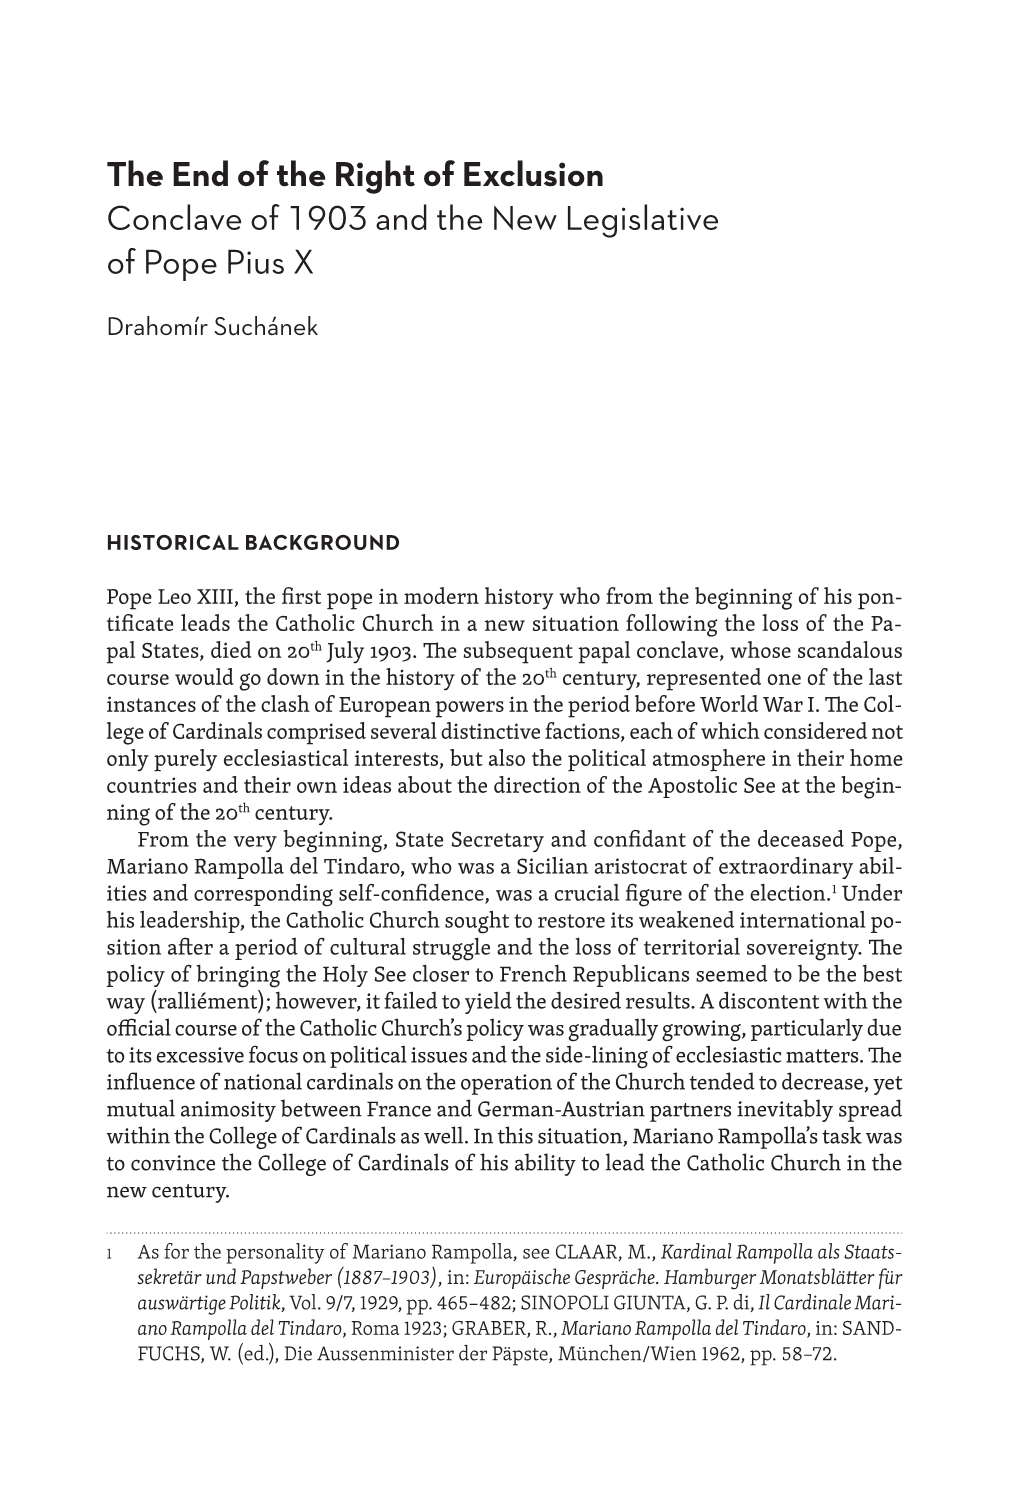 The End of the Right of Exclusion Conclave of 1903 and the New Legislative of Pope Pius X